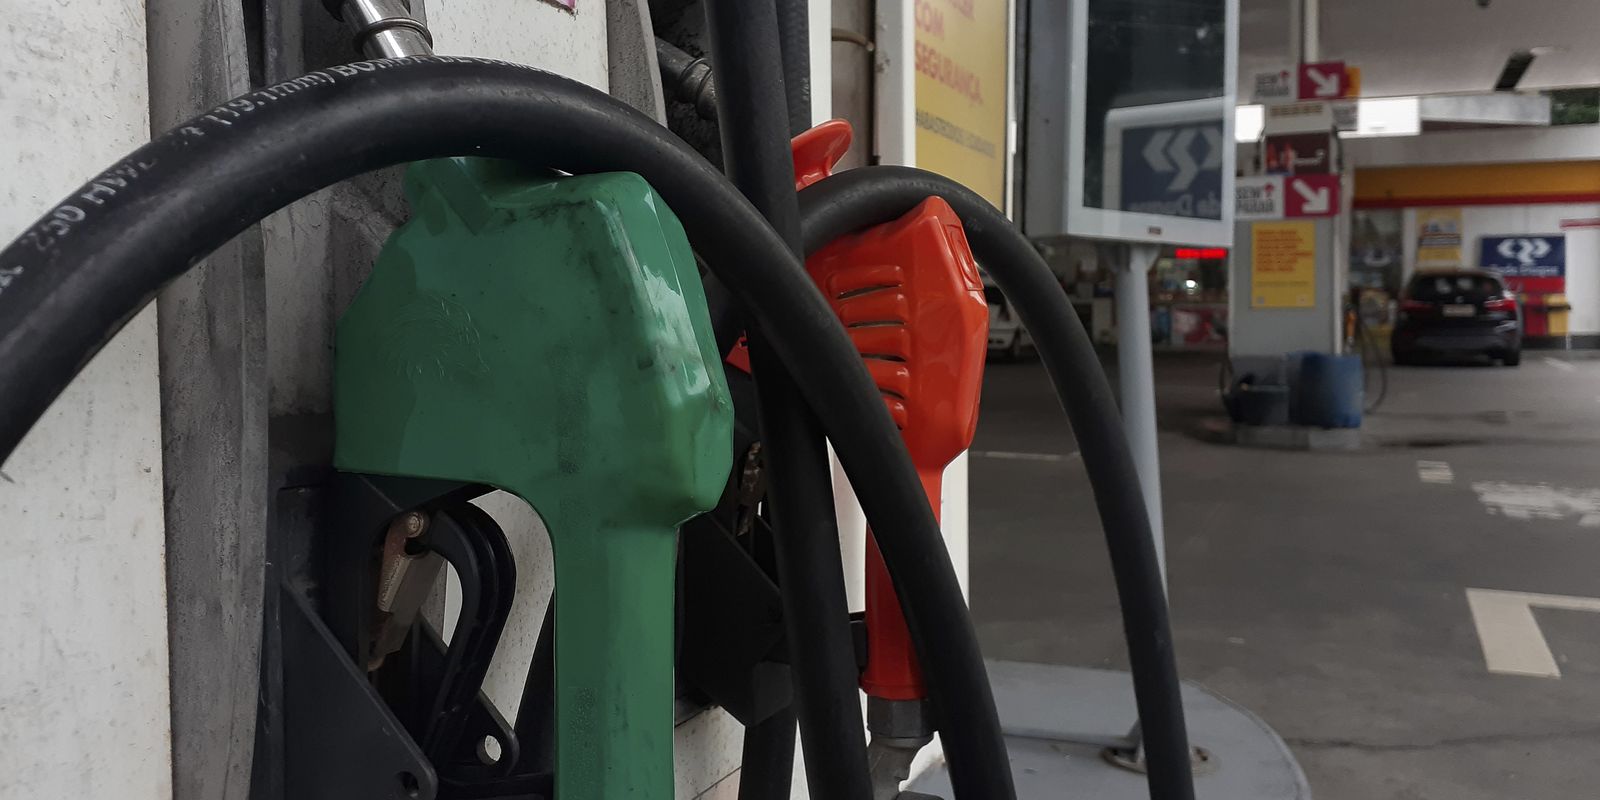 Biodiesel content in diesel will remain at 10% until March 31
– News X